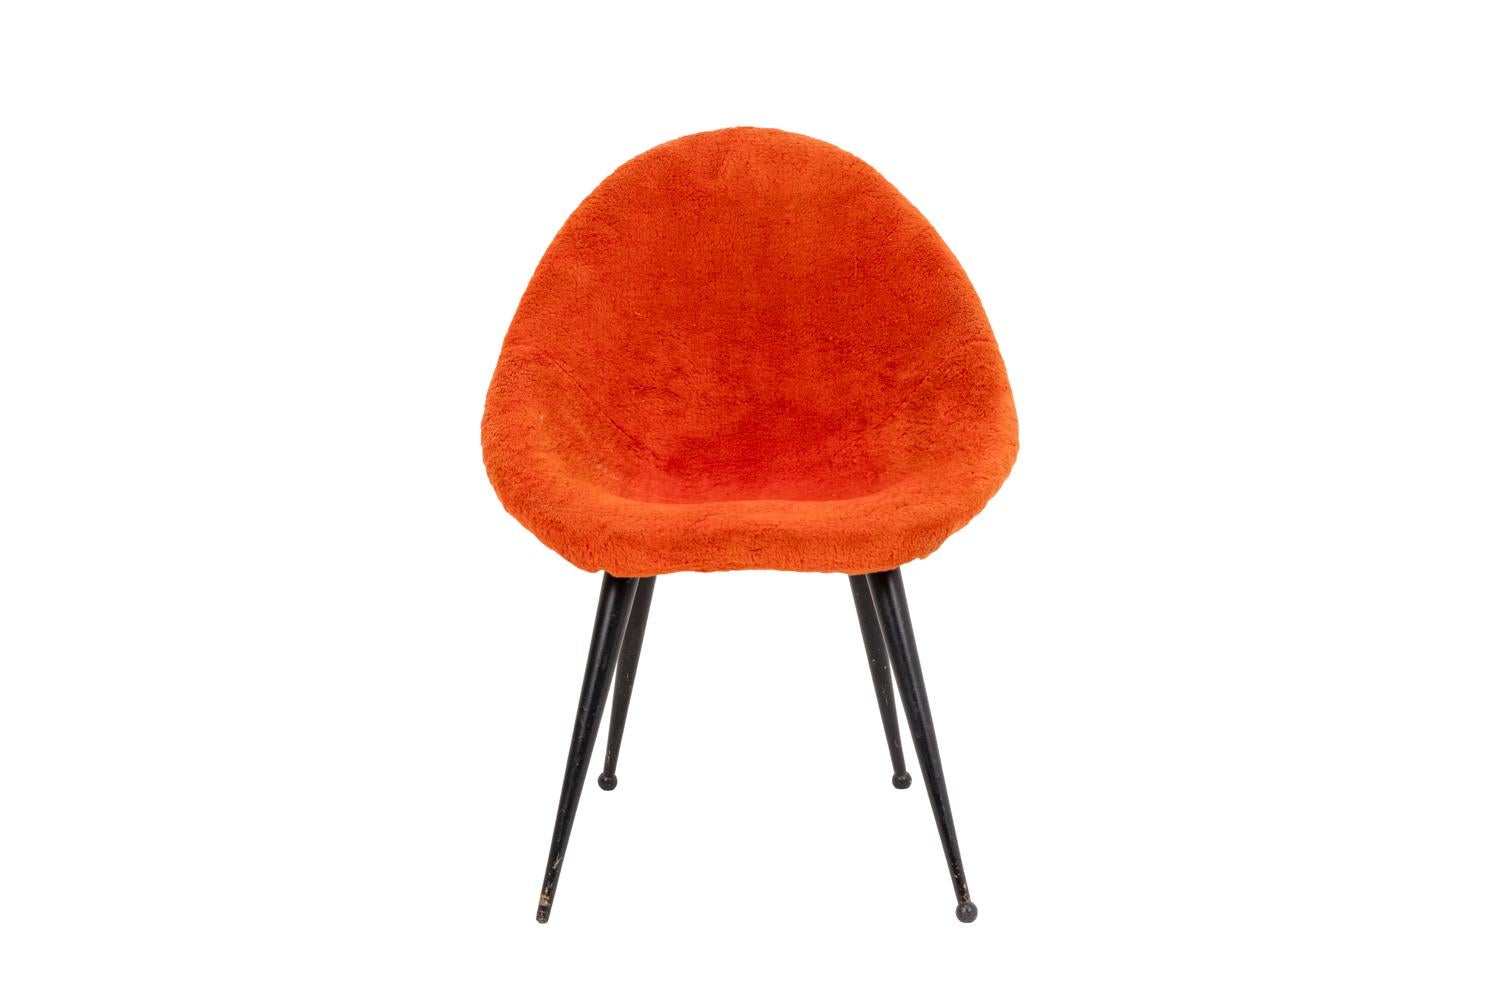 Egg-shaped armchair standing on four tapered legs in black lacquered metal ending by balls. Rounded seat and back covered by red false fur fabric.

Work realized in the 1950s.